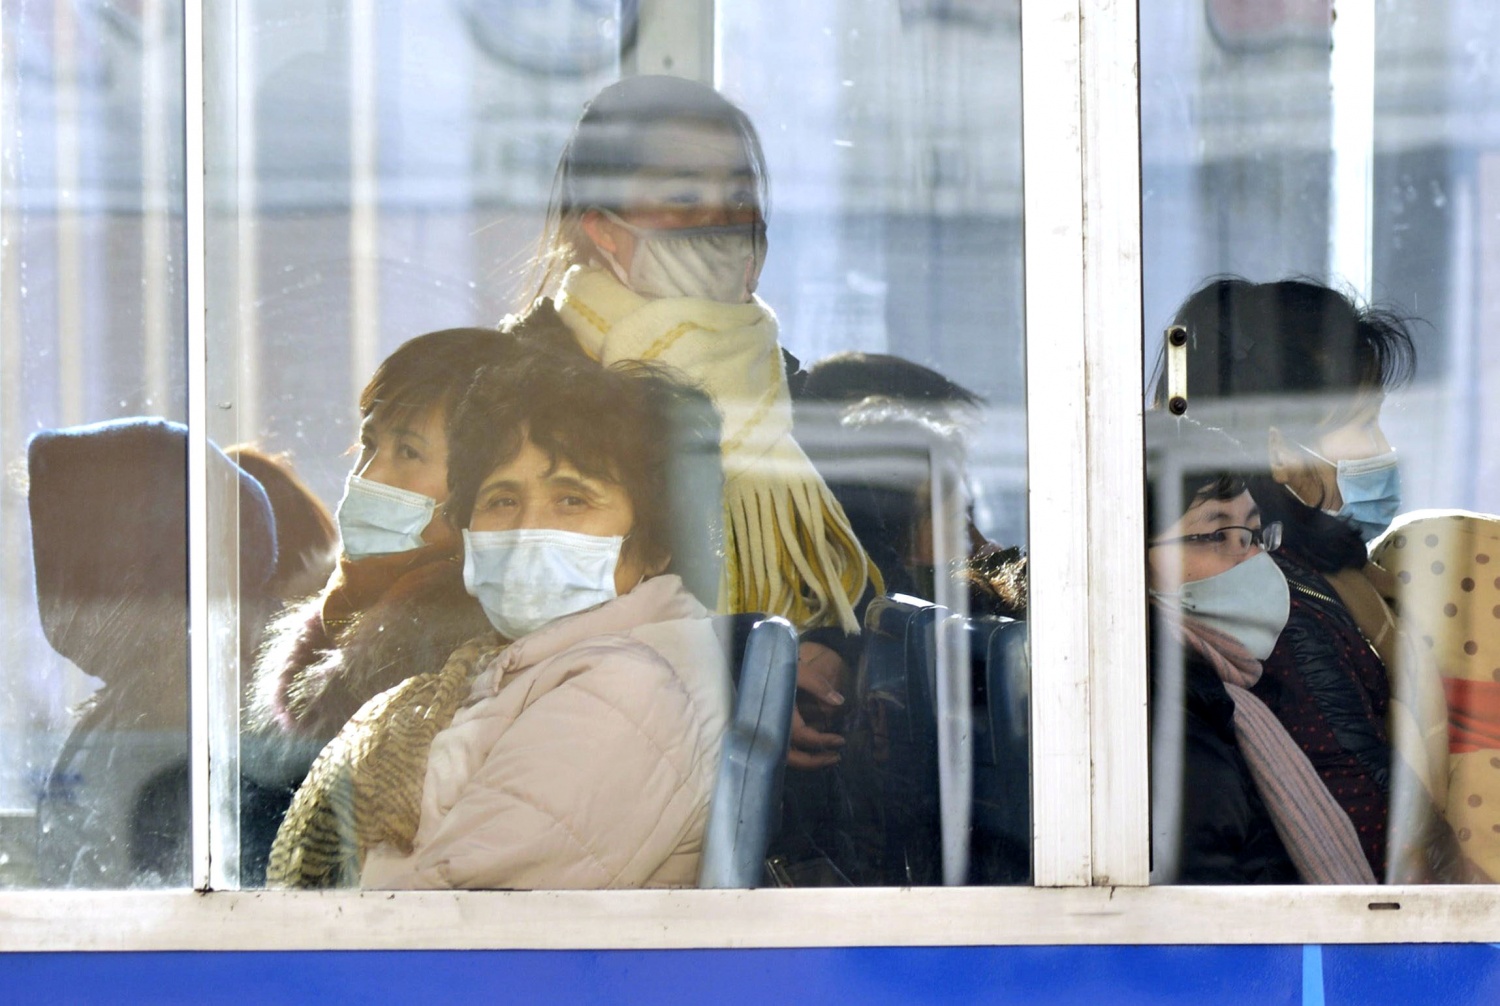 North Korean Man 'Shot Dead' After Being Suspected With Coronavirus